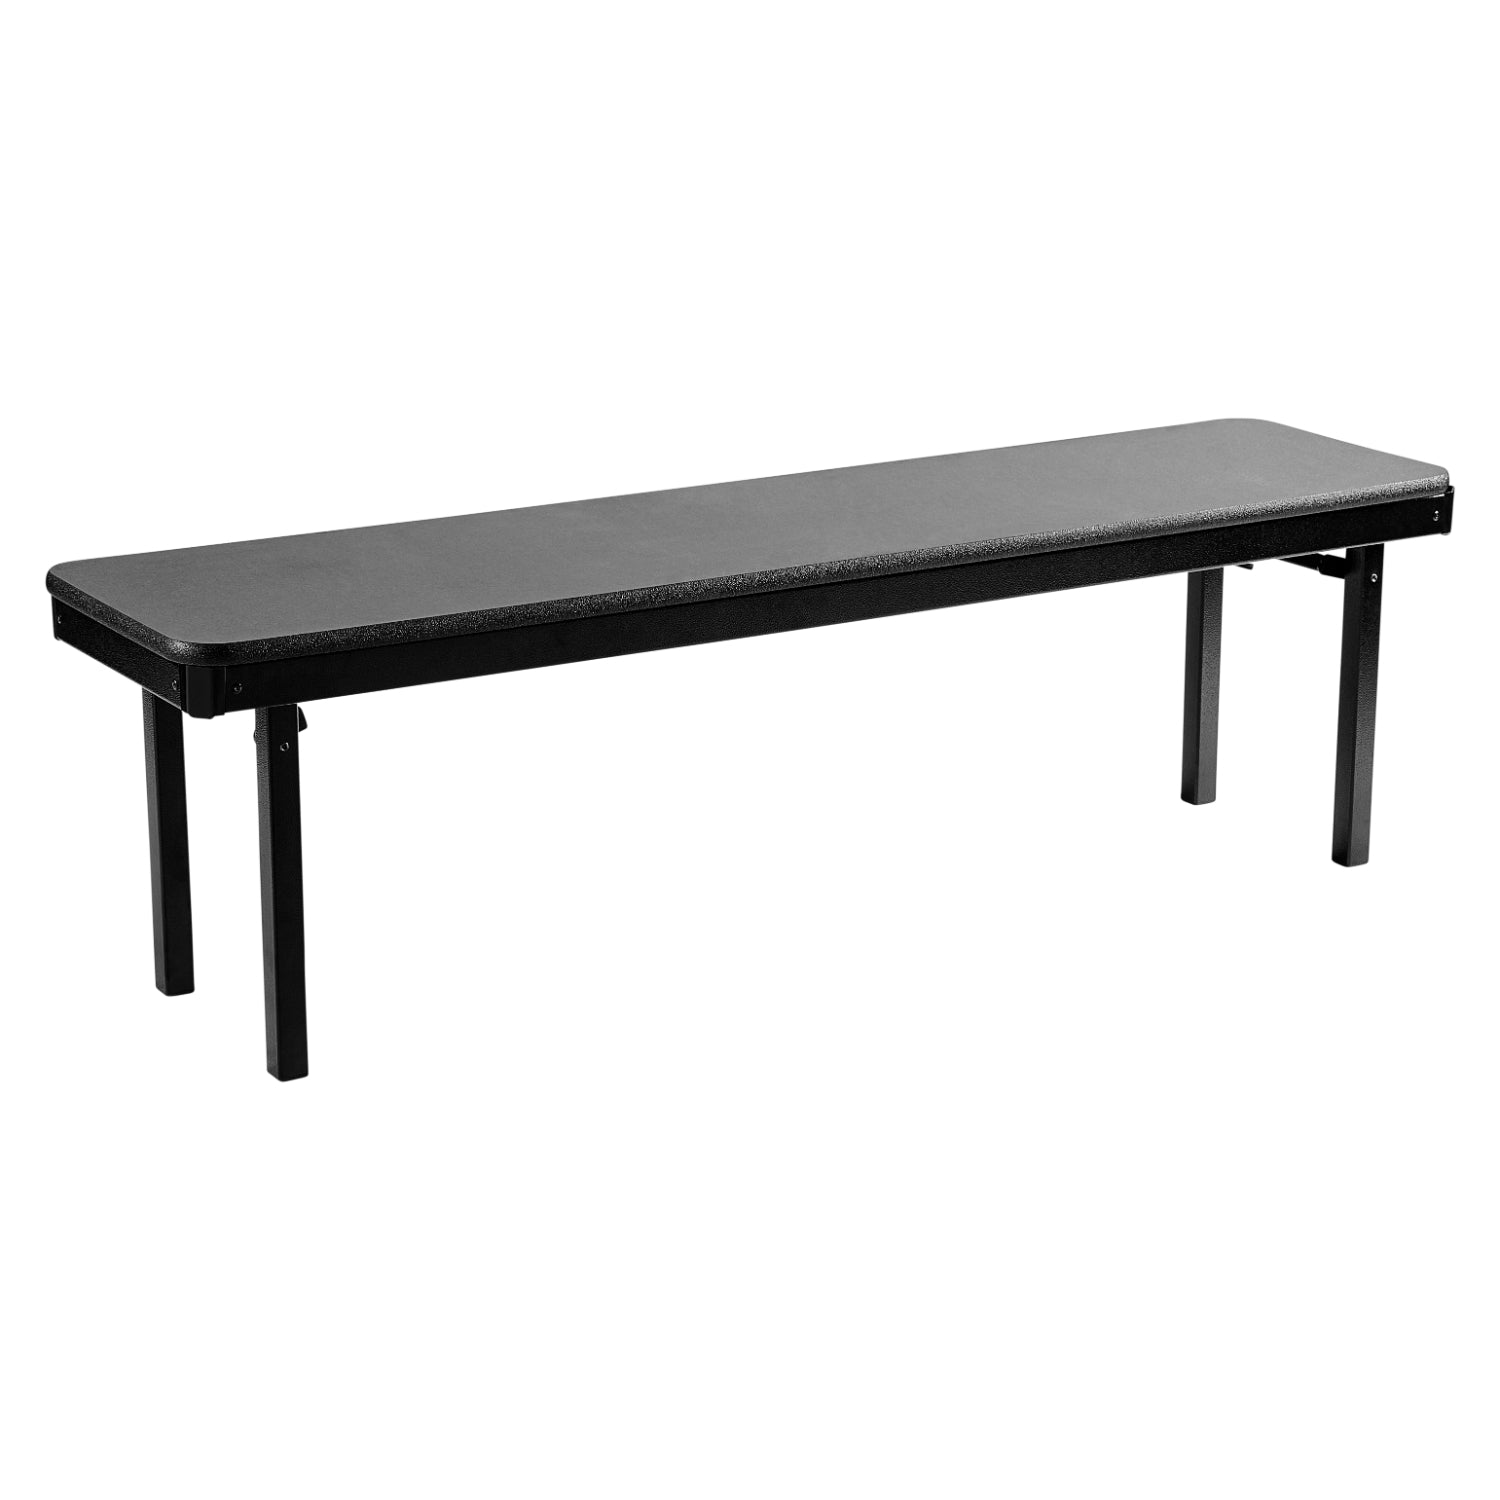 Max Seating Folding Bench, 15" x 72", MDF Core, High Pressure Laminate Top with ProtectEdge